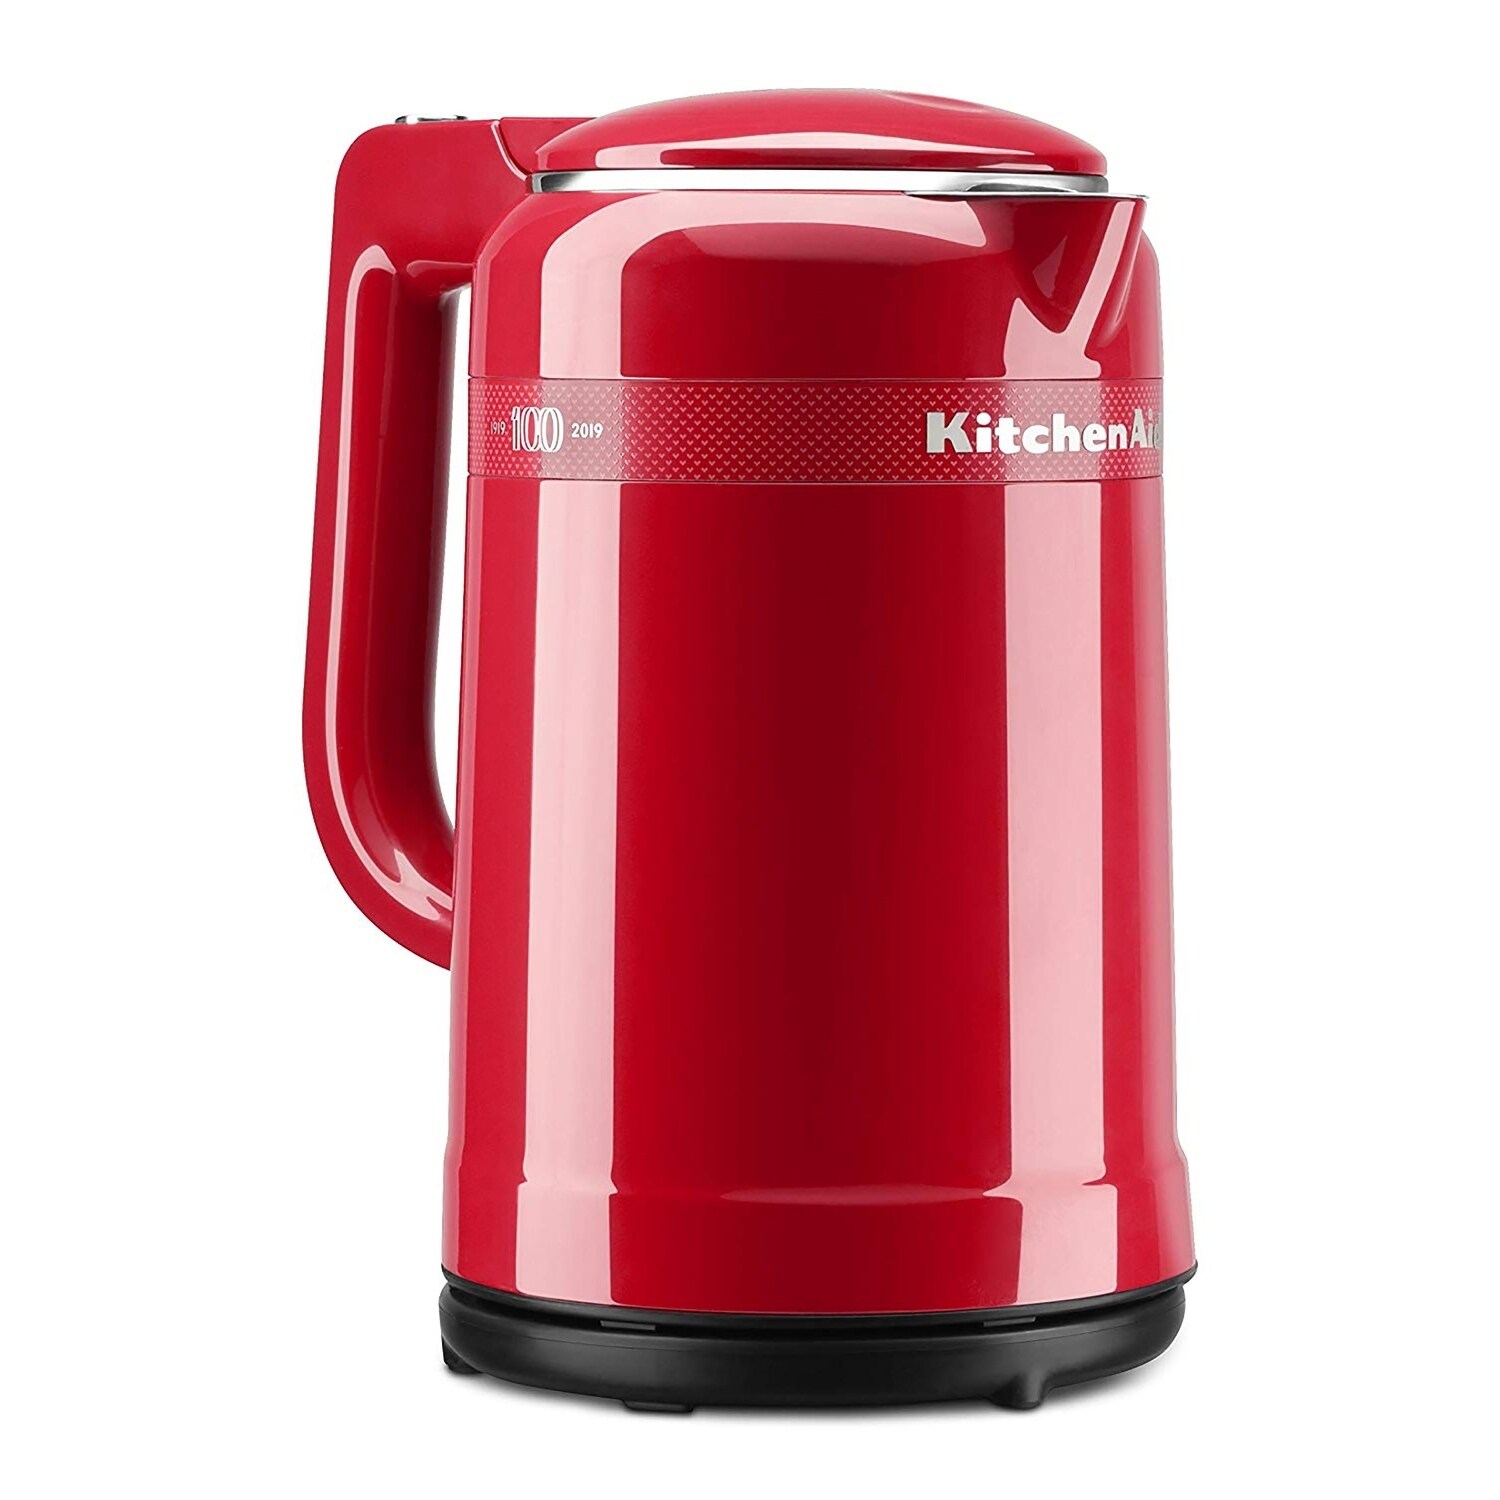 https://ak1.ostkcdn.com/images/products/27485759/KitchenAid-100-Year-Limited-Edition-Queen-of-Hearts-Electric-Kettle-fdcffdd9-899a-48df-9a79-03fd661f4b6b.jpg